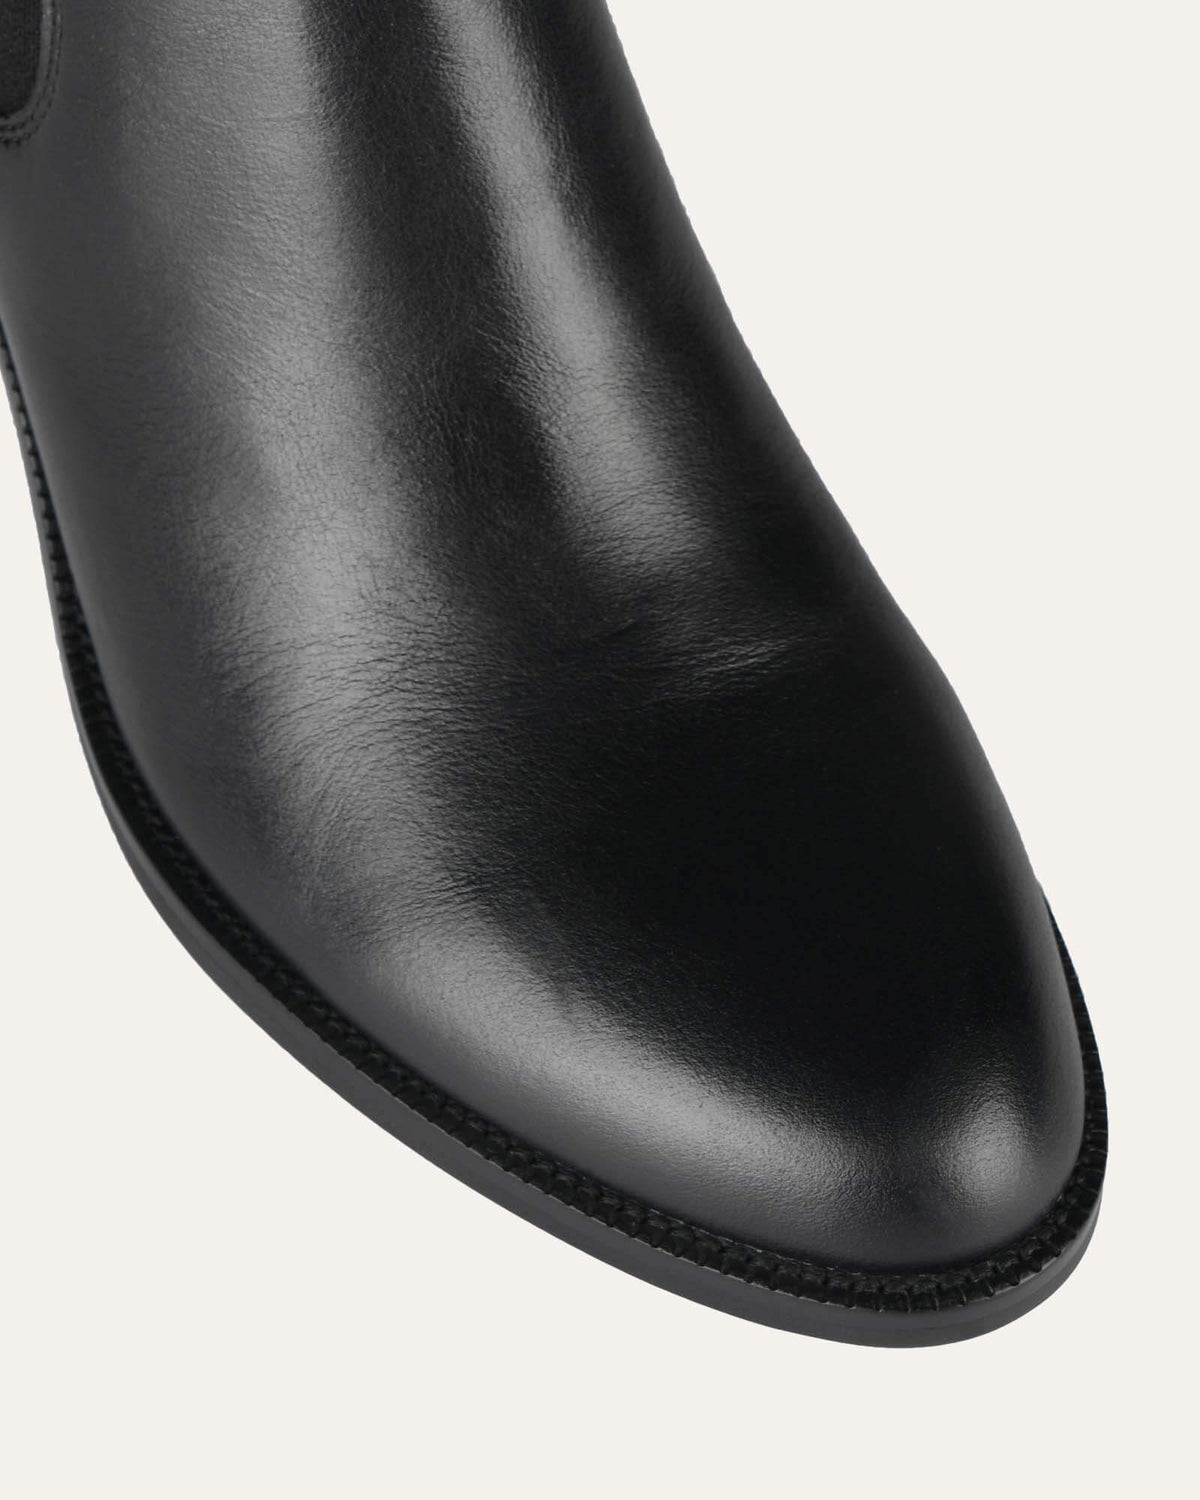 MARLOWE MID ANKLE BOOTS BLACK LEATHER